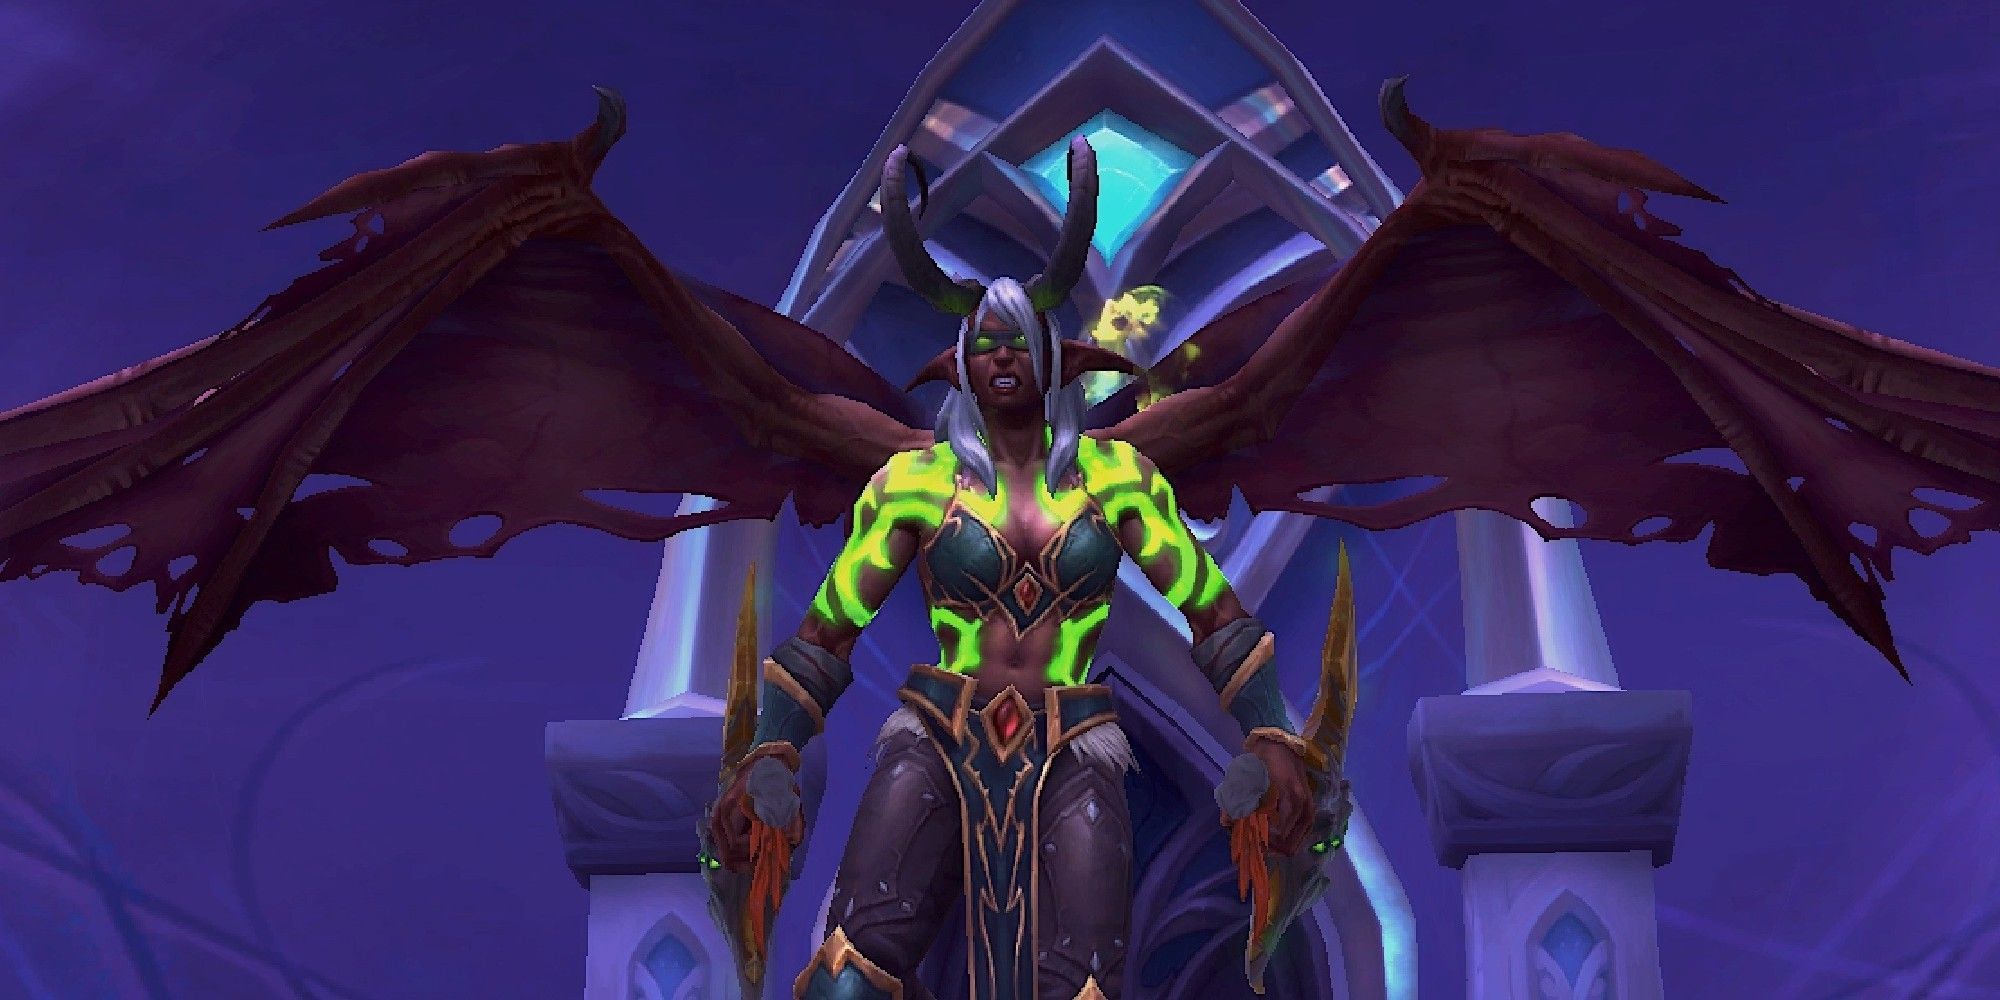 A Demon Hunter character in World of Warcraft